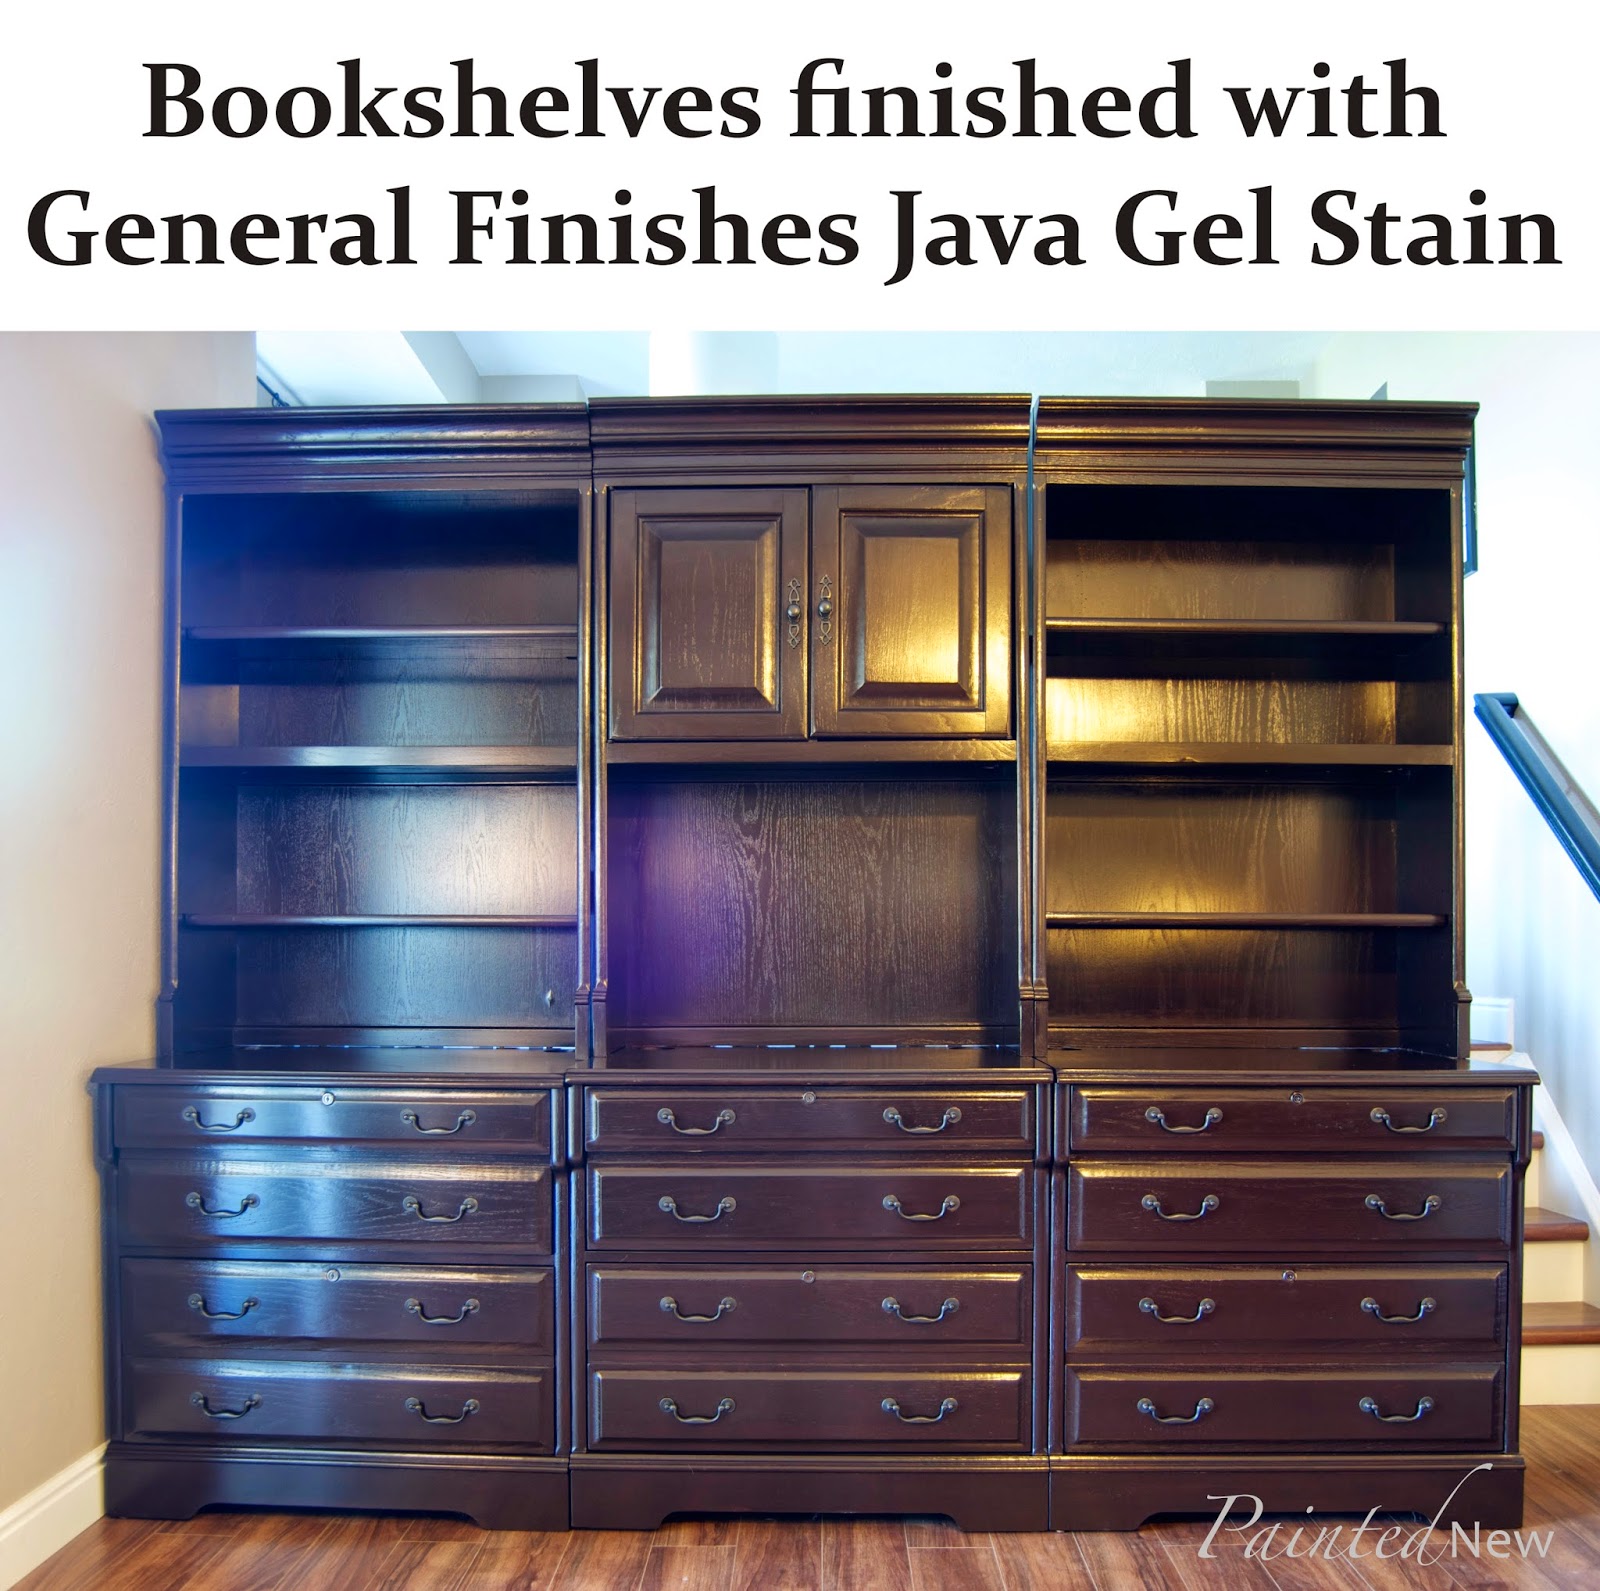 Painted New General Finishes Gel Stained Bookcases